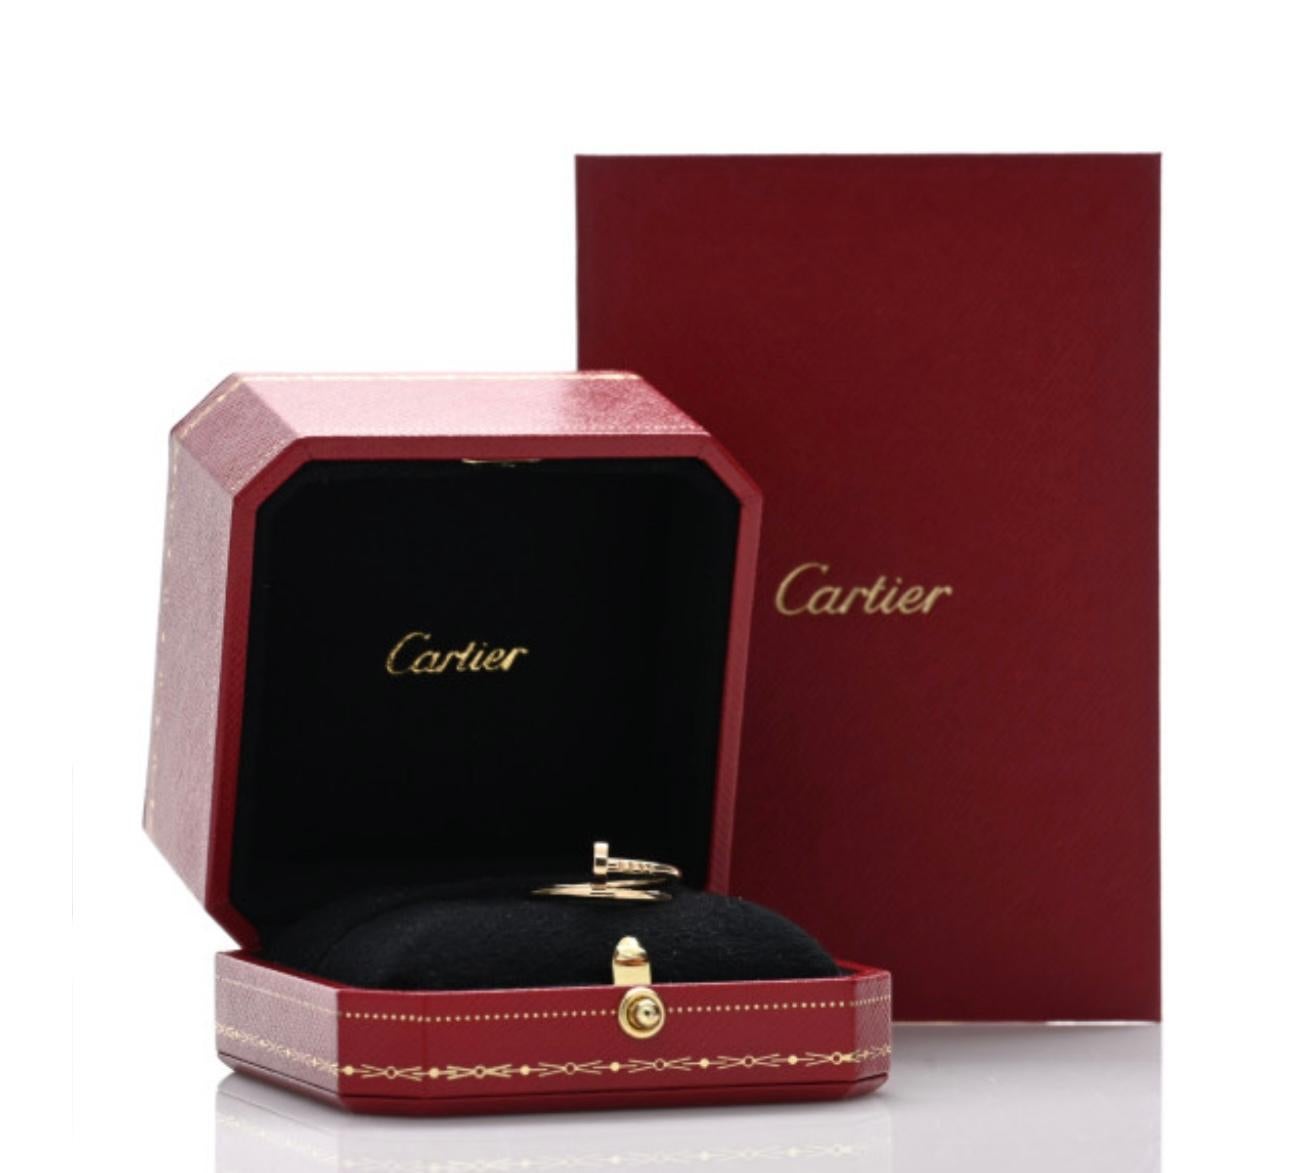 CARTIER
18K Yellow Gold Juste Un Clou Ring 46
comes with original box and Guarantee Certificate
18 Karat Yellow Gold Weight 3.2GM  
Yellow Gold
Serial # SYZ313
Ring Size 46, US 4.5
Used excellent  condition
Authenticity and money back is